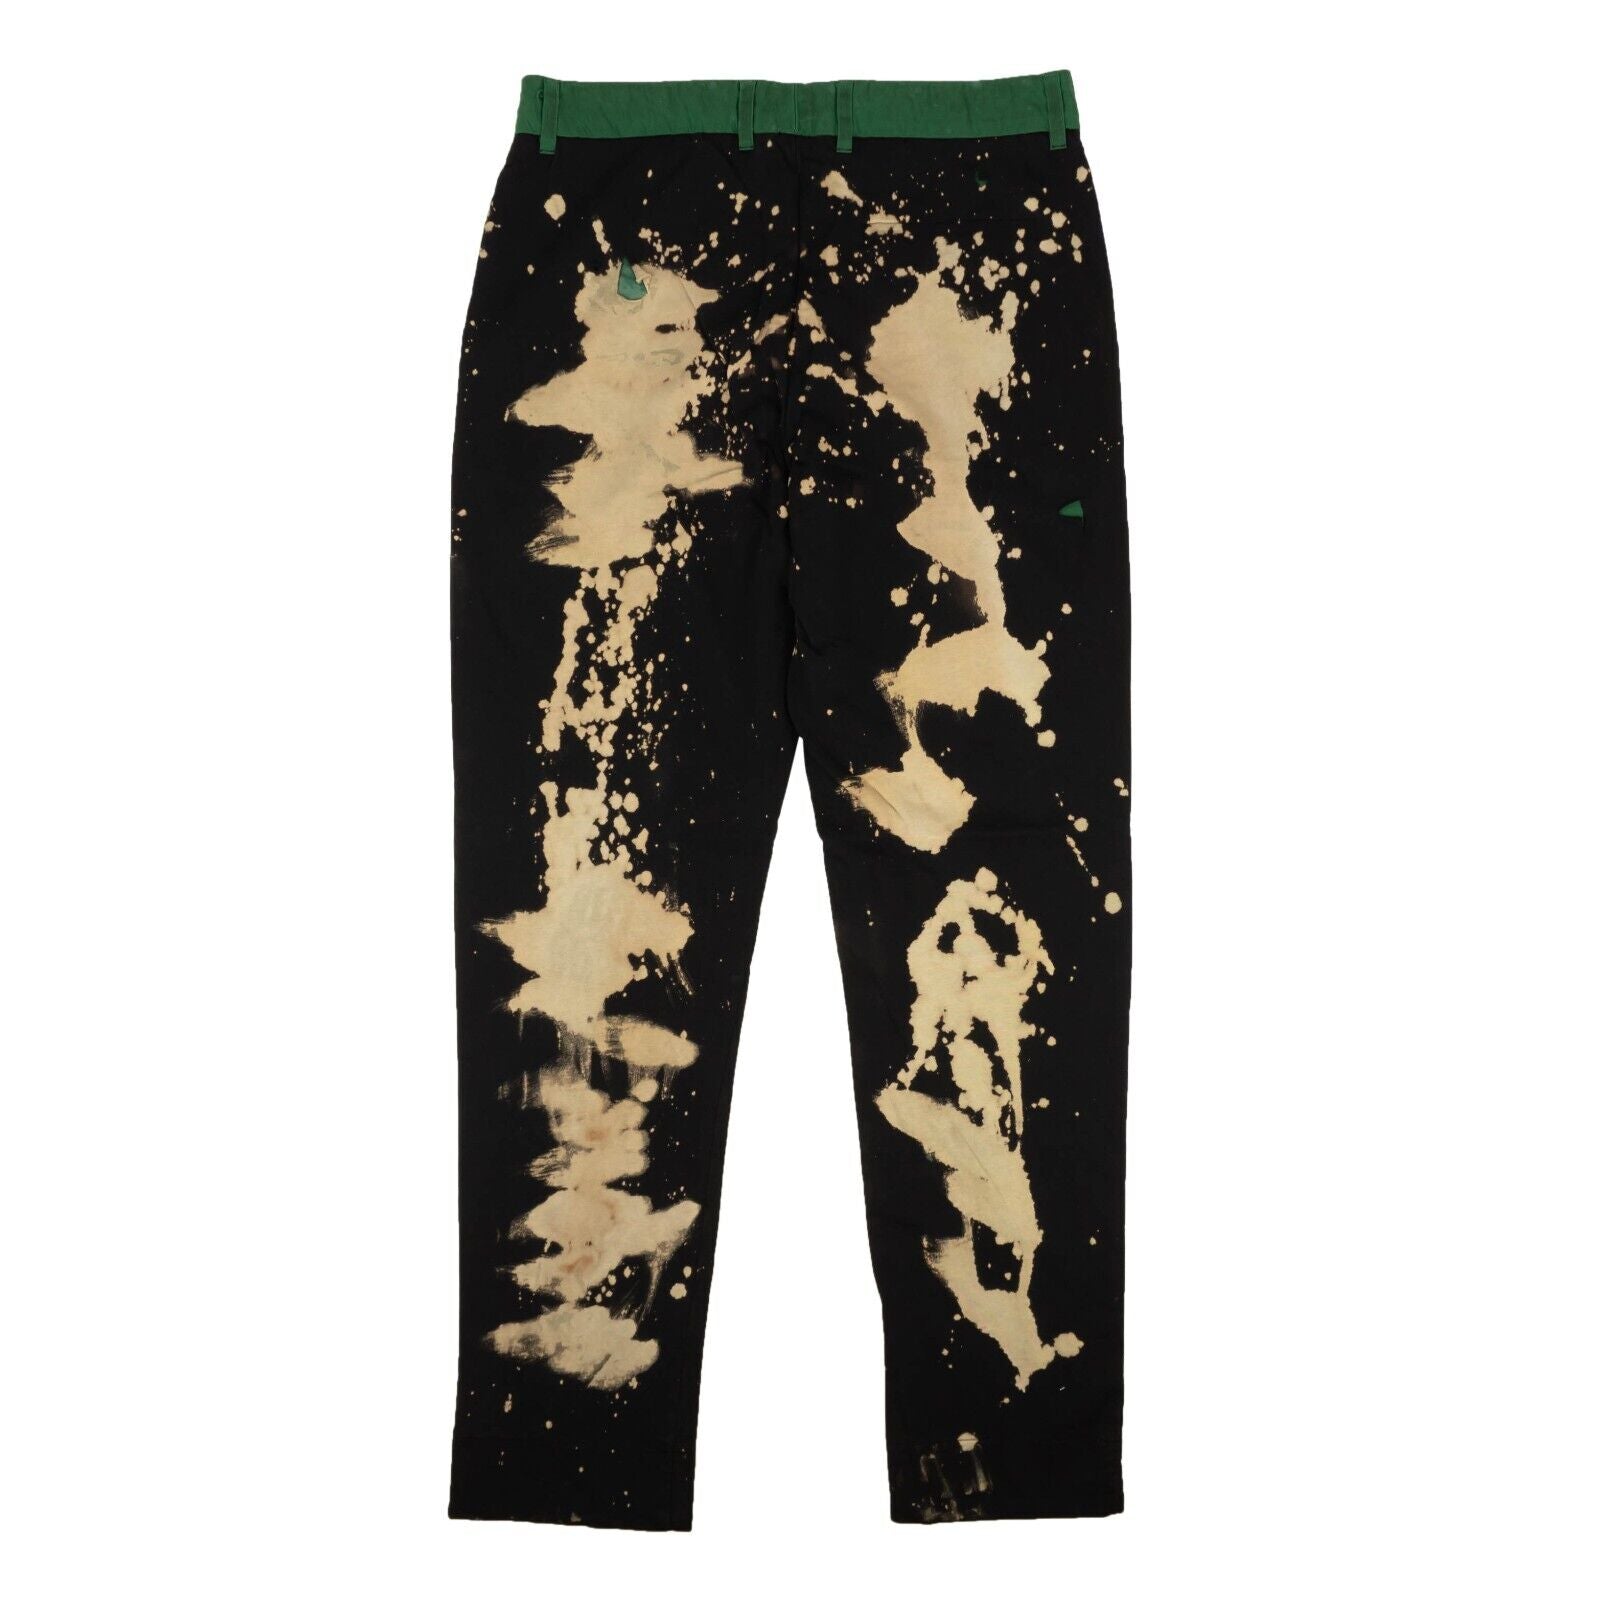 424 On Fairfax Distressed Bleached Pants - Green/Black/Brown